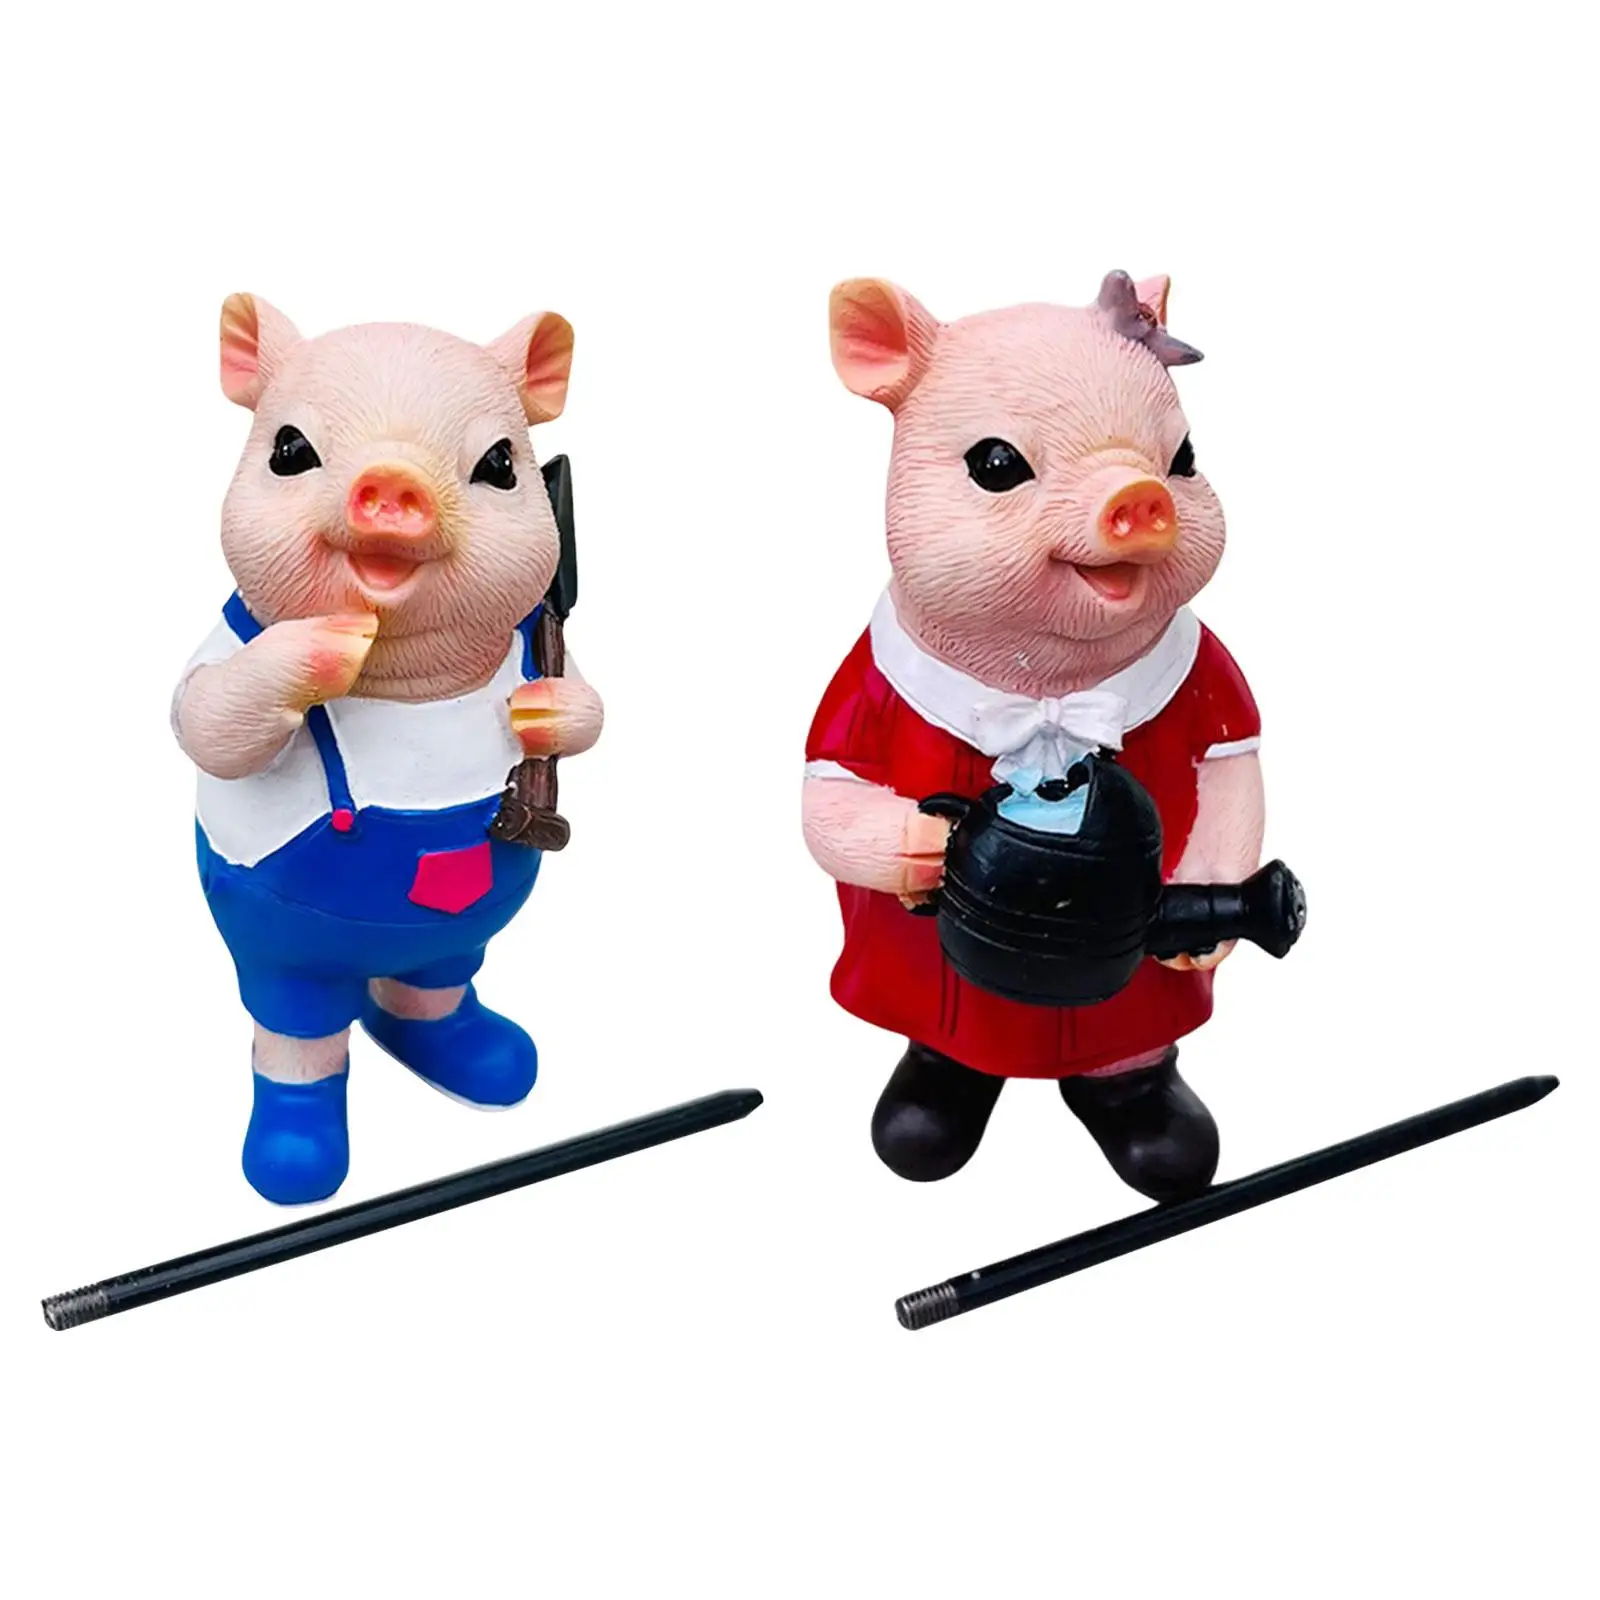 Fairy Garden Ornaments Lawn Ornaments Resin Pig Sculptures Resin Pig Stakes for Micro Landscape Plant Pot Indoor Outdoor